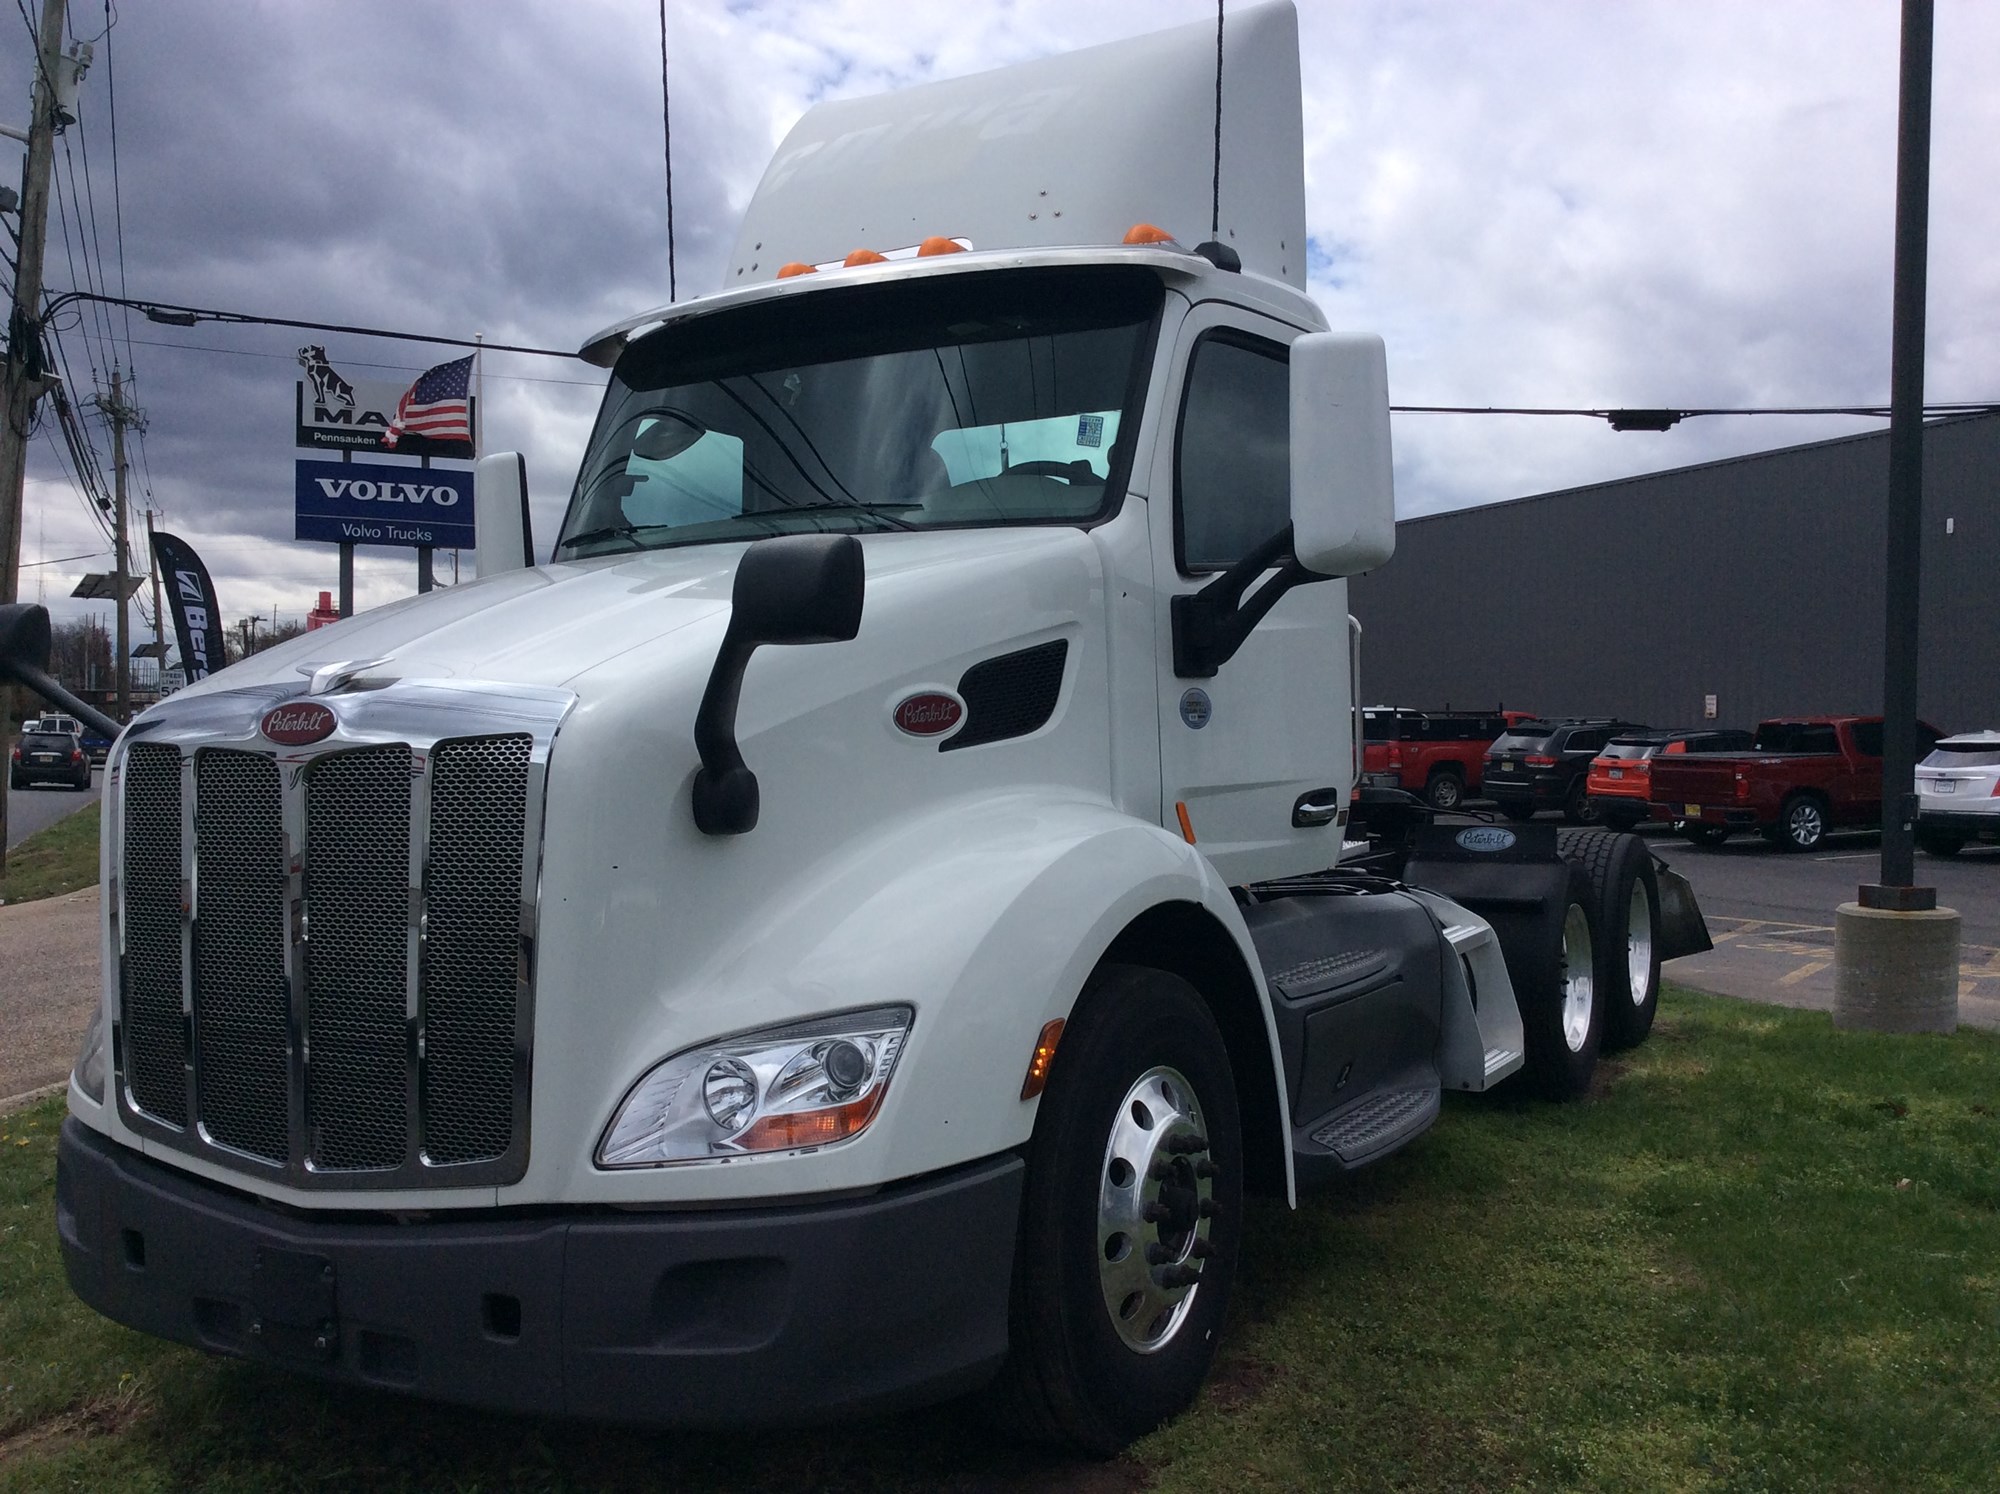 Used Truck Inventory - 1000907 01 - 74